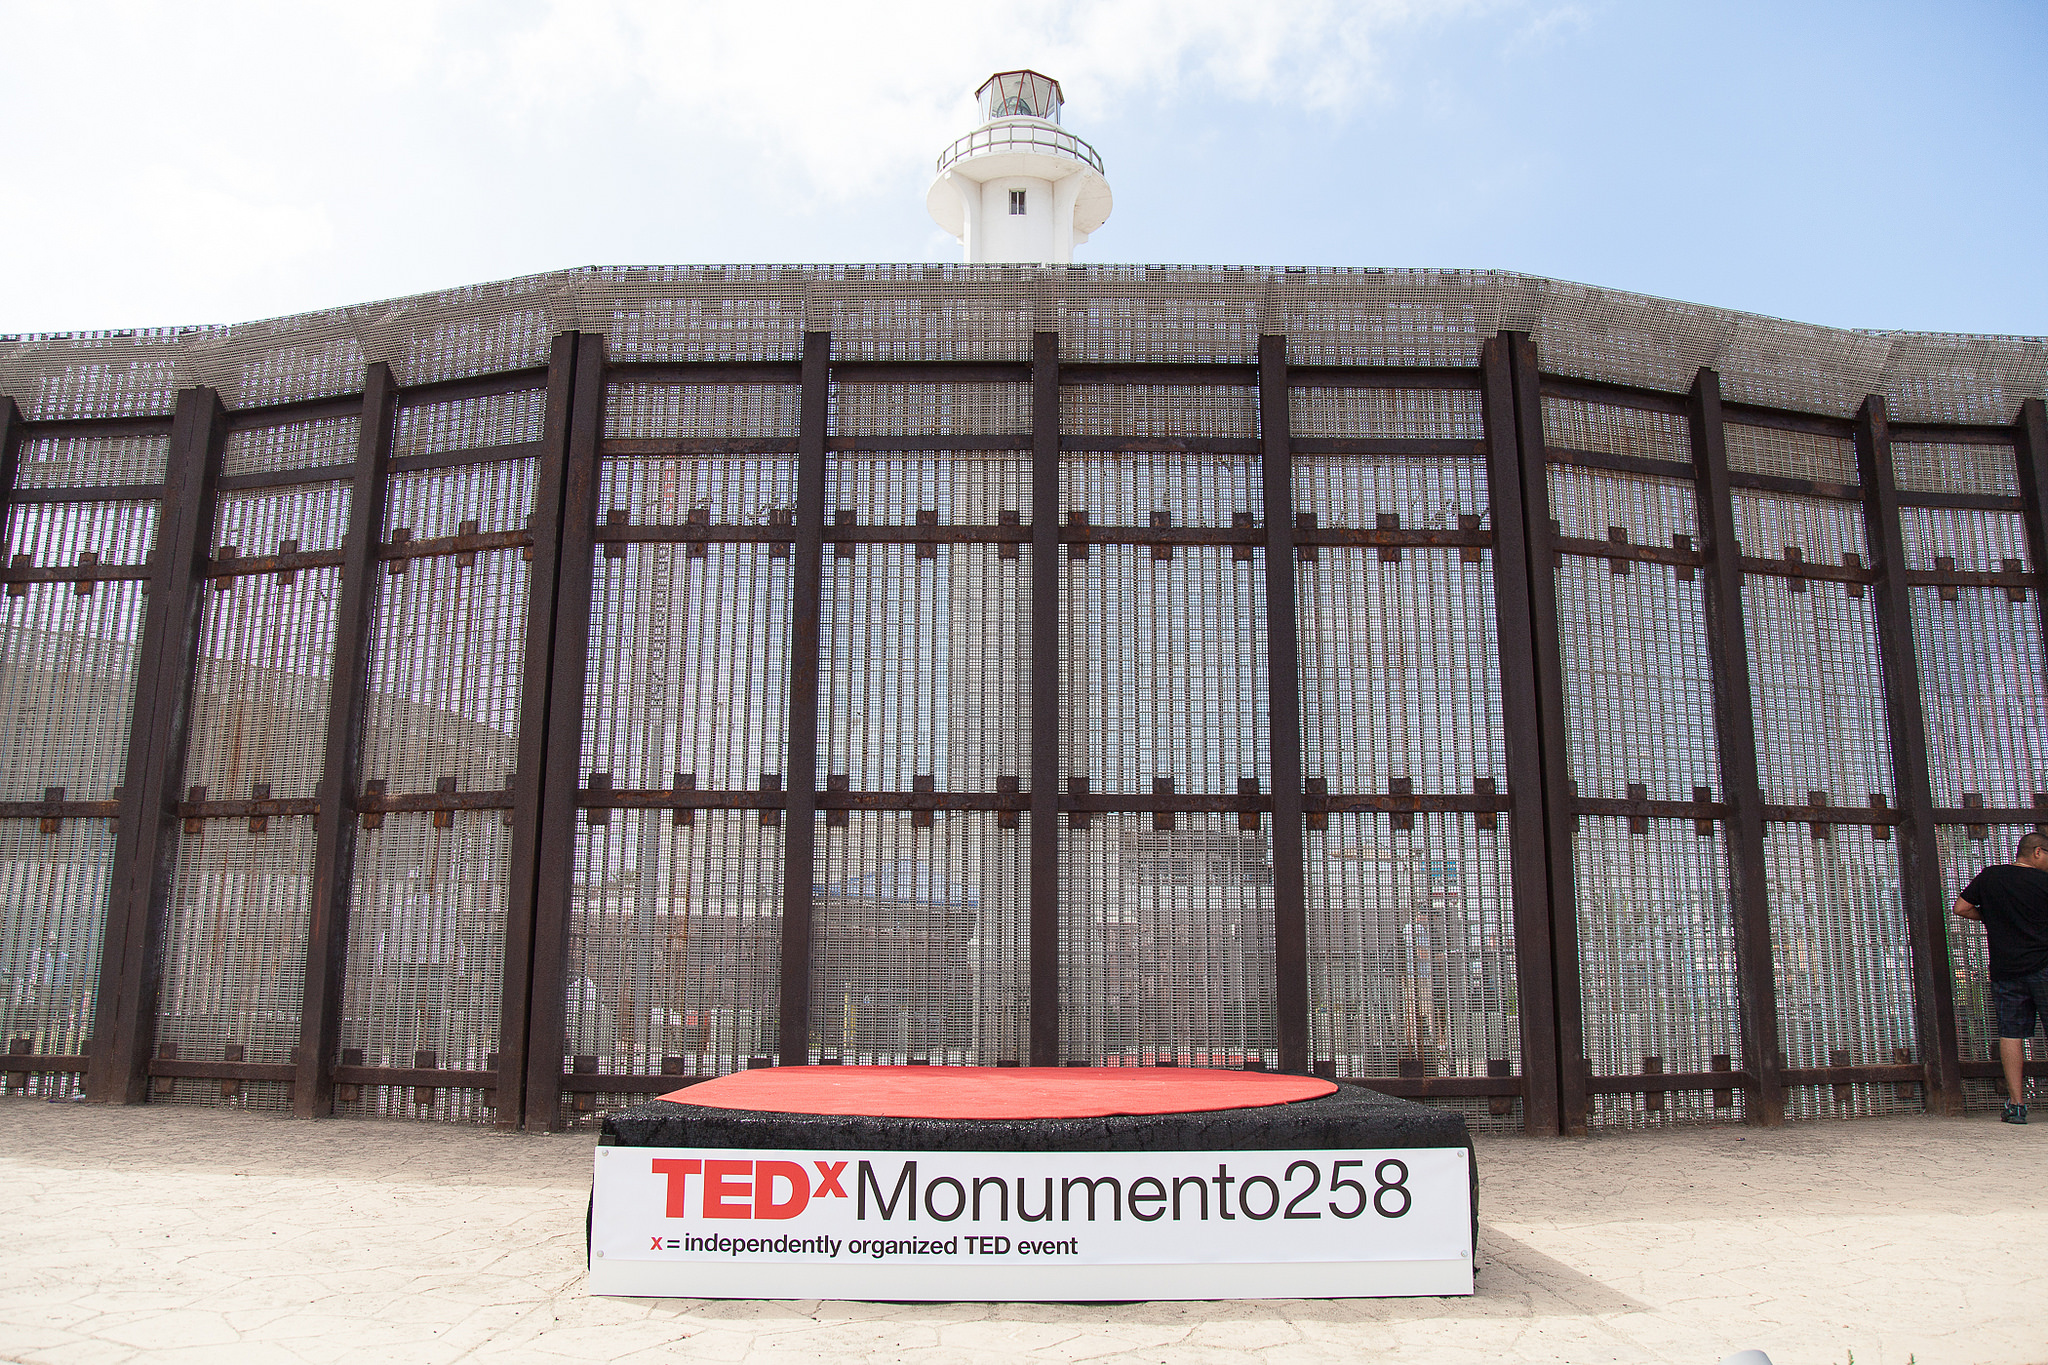 A TEDx event crosses the US-Mexico border, to show that ideas can’t
be fenced in